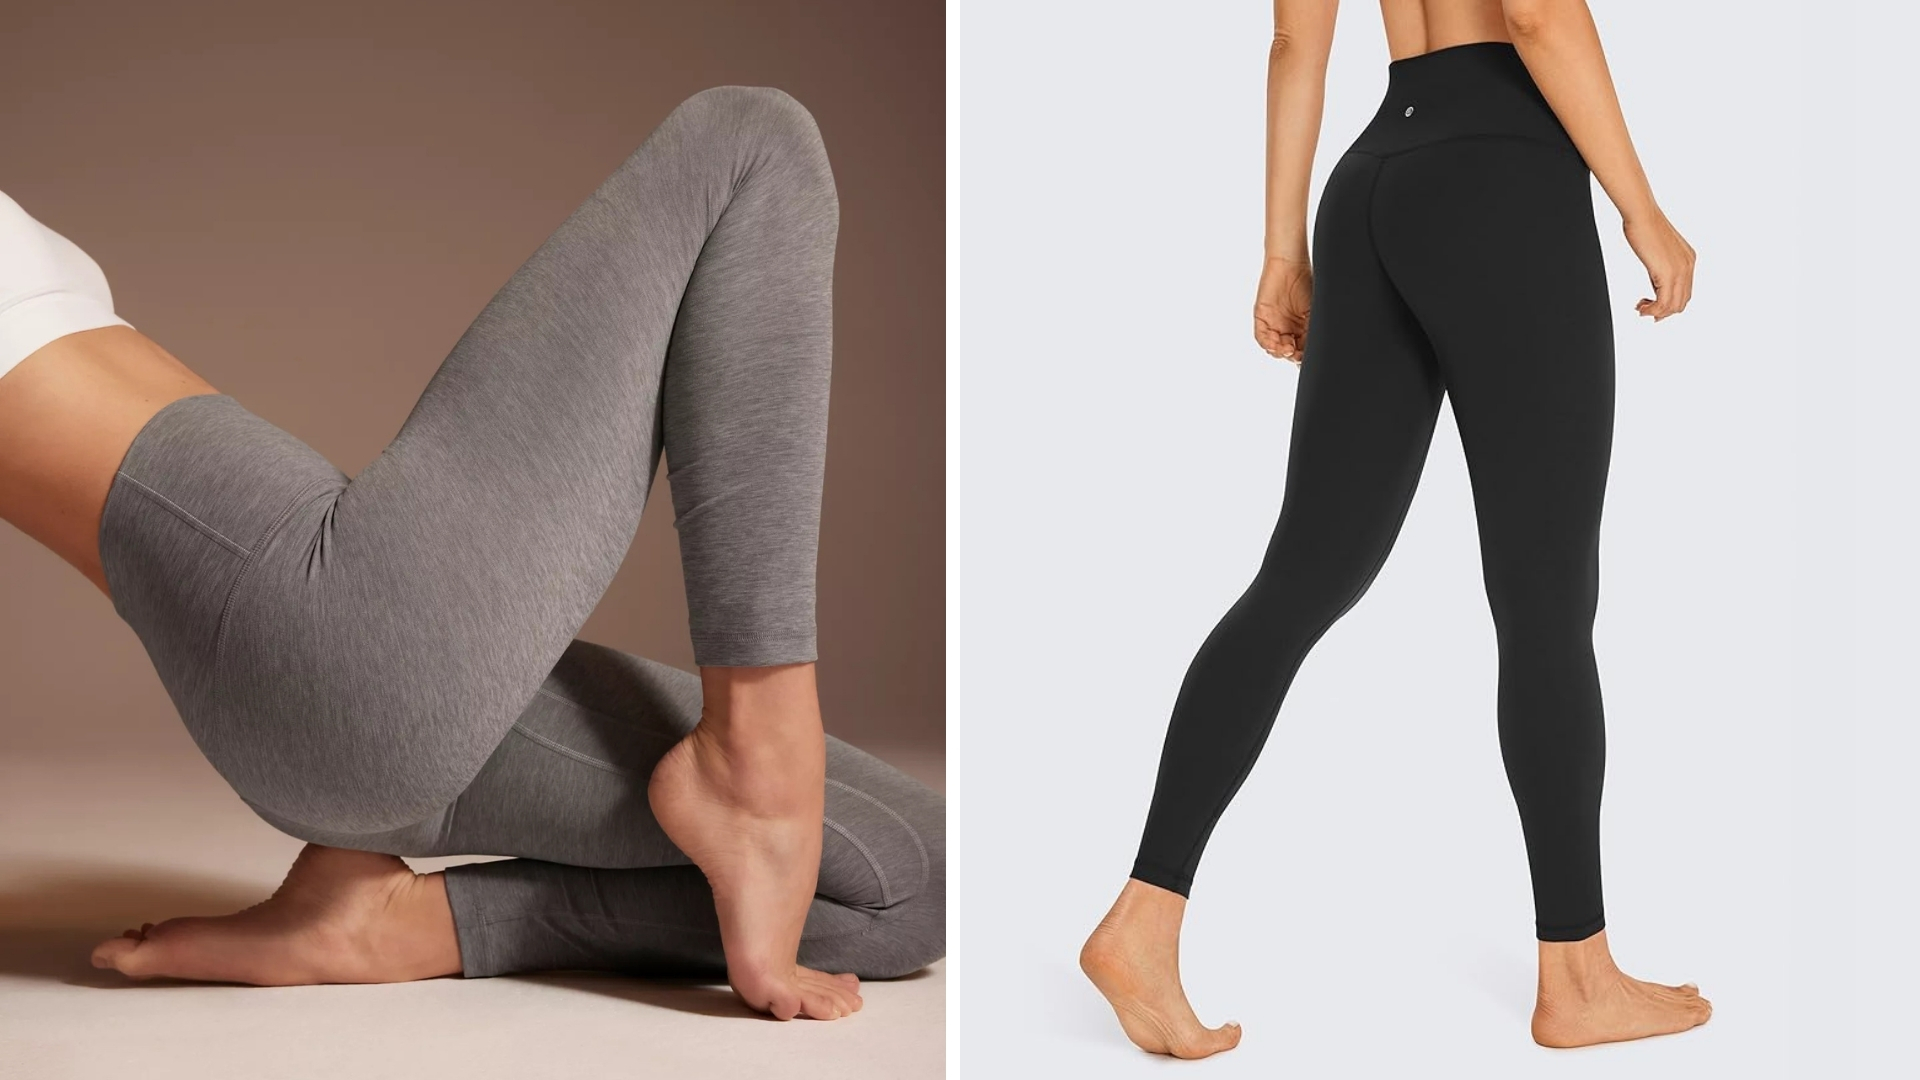 The 12 Best Athleisure Clothing Brands You Can Wear While Working From Home